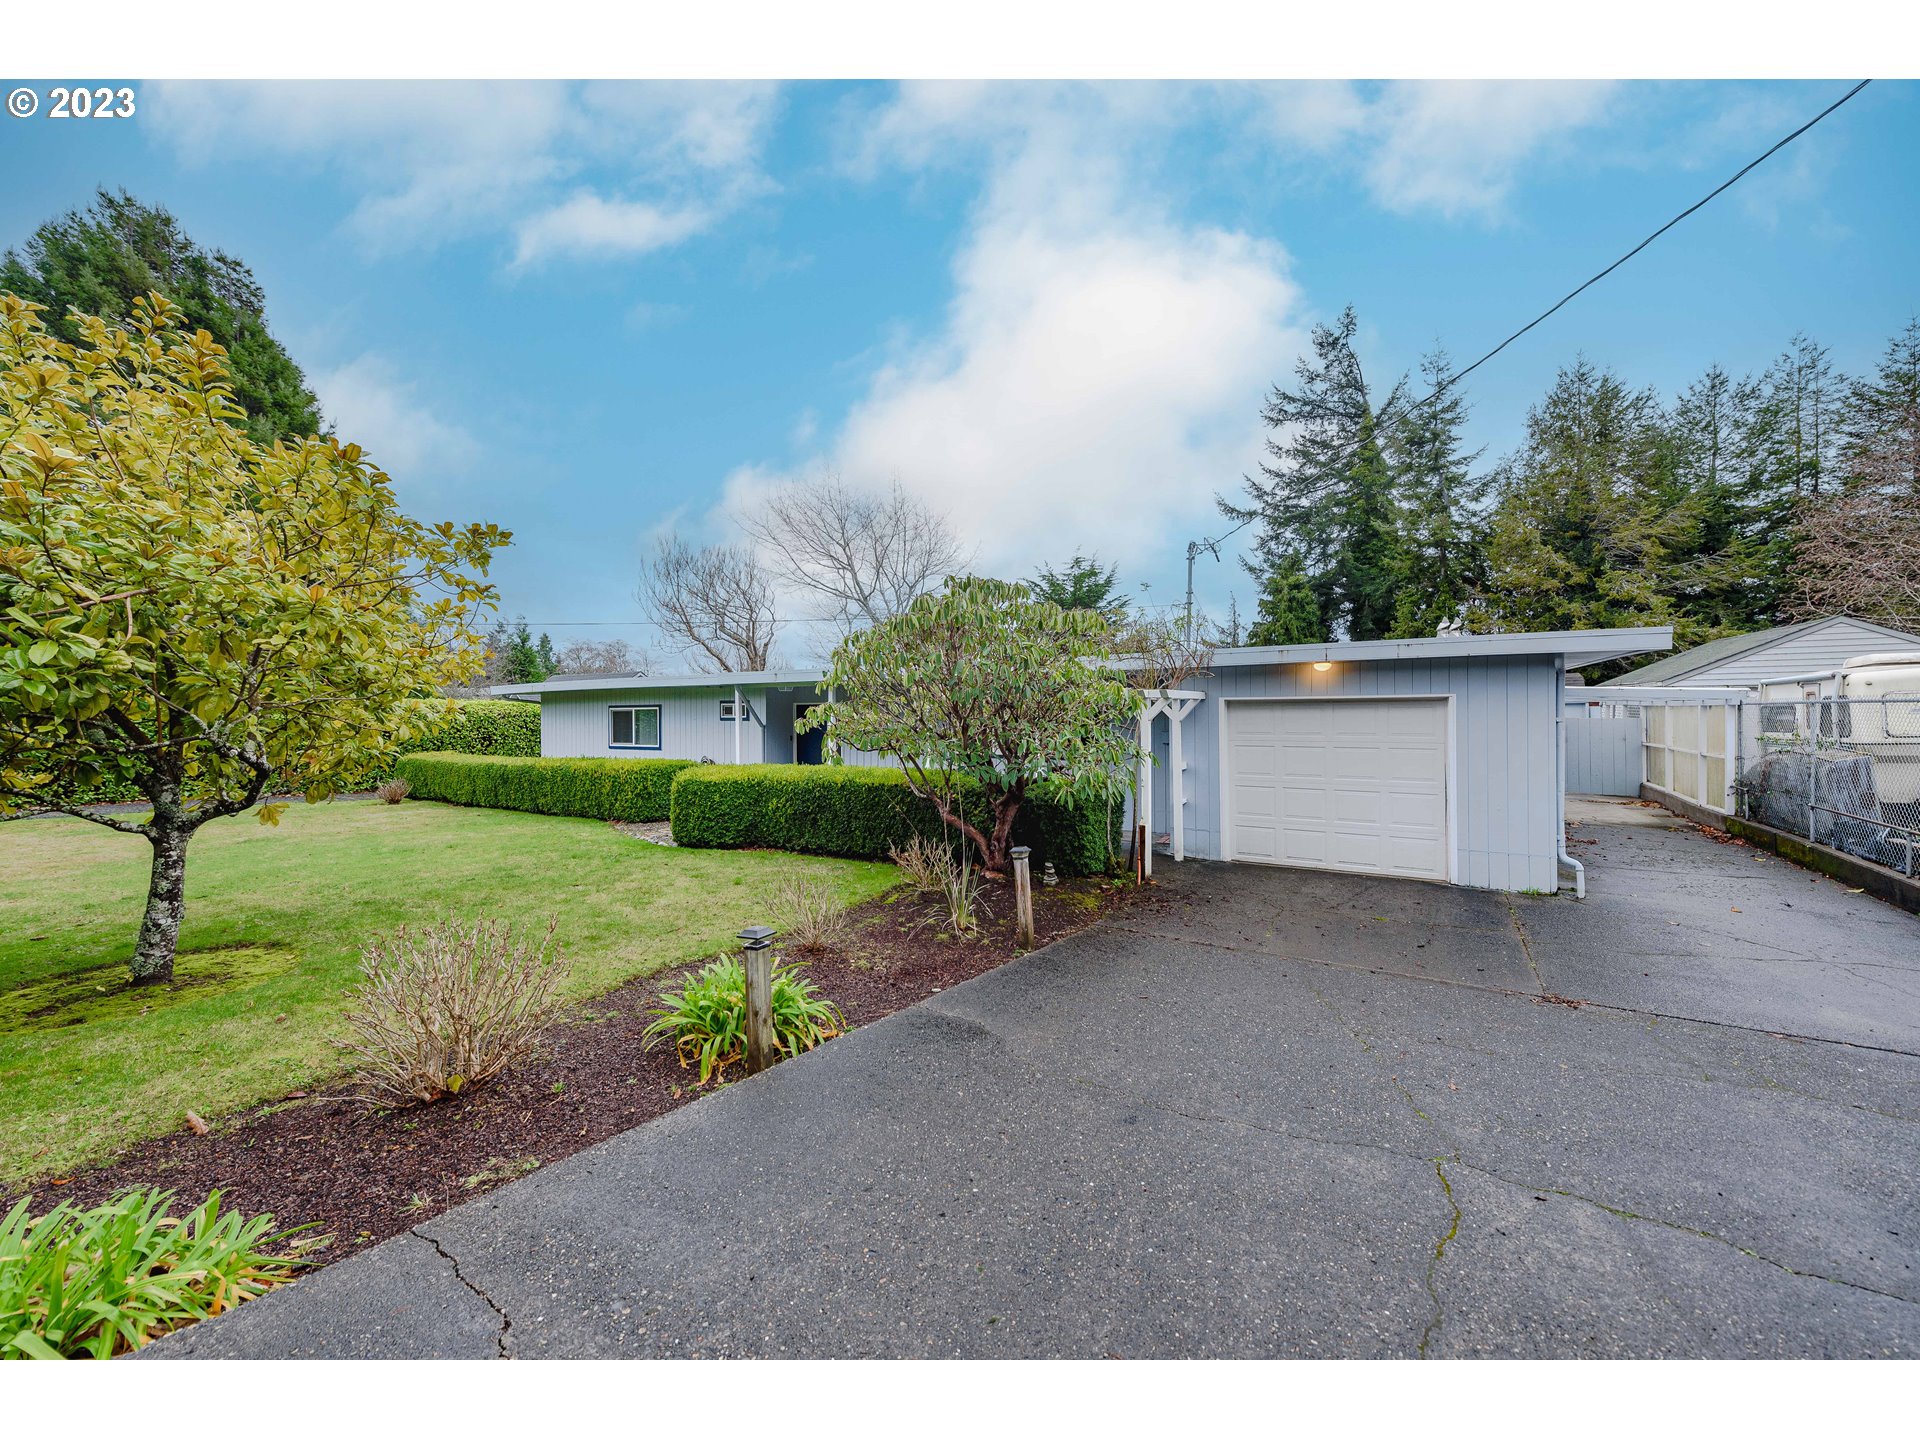 2680 BRUSSELLS, North Bend, OR 97459